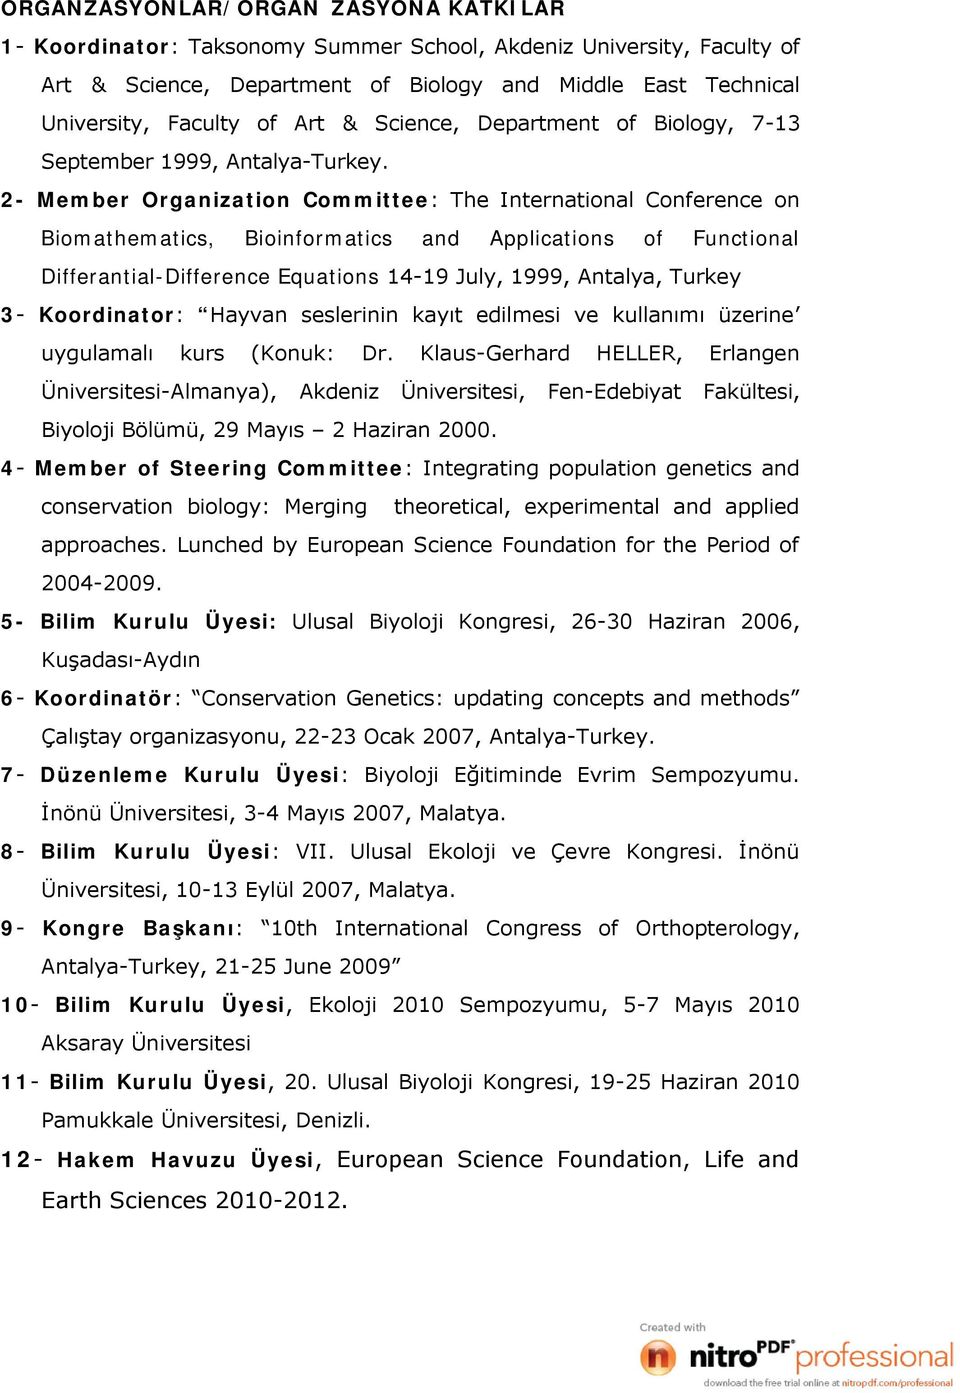 2- Member Organization Committee: The International Conference on Biomathematics, Bioinformatics and Applications of Functional Differantial-Difference Equations 14-19 July, 1999, Antalya, Turkey 3-